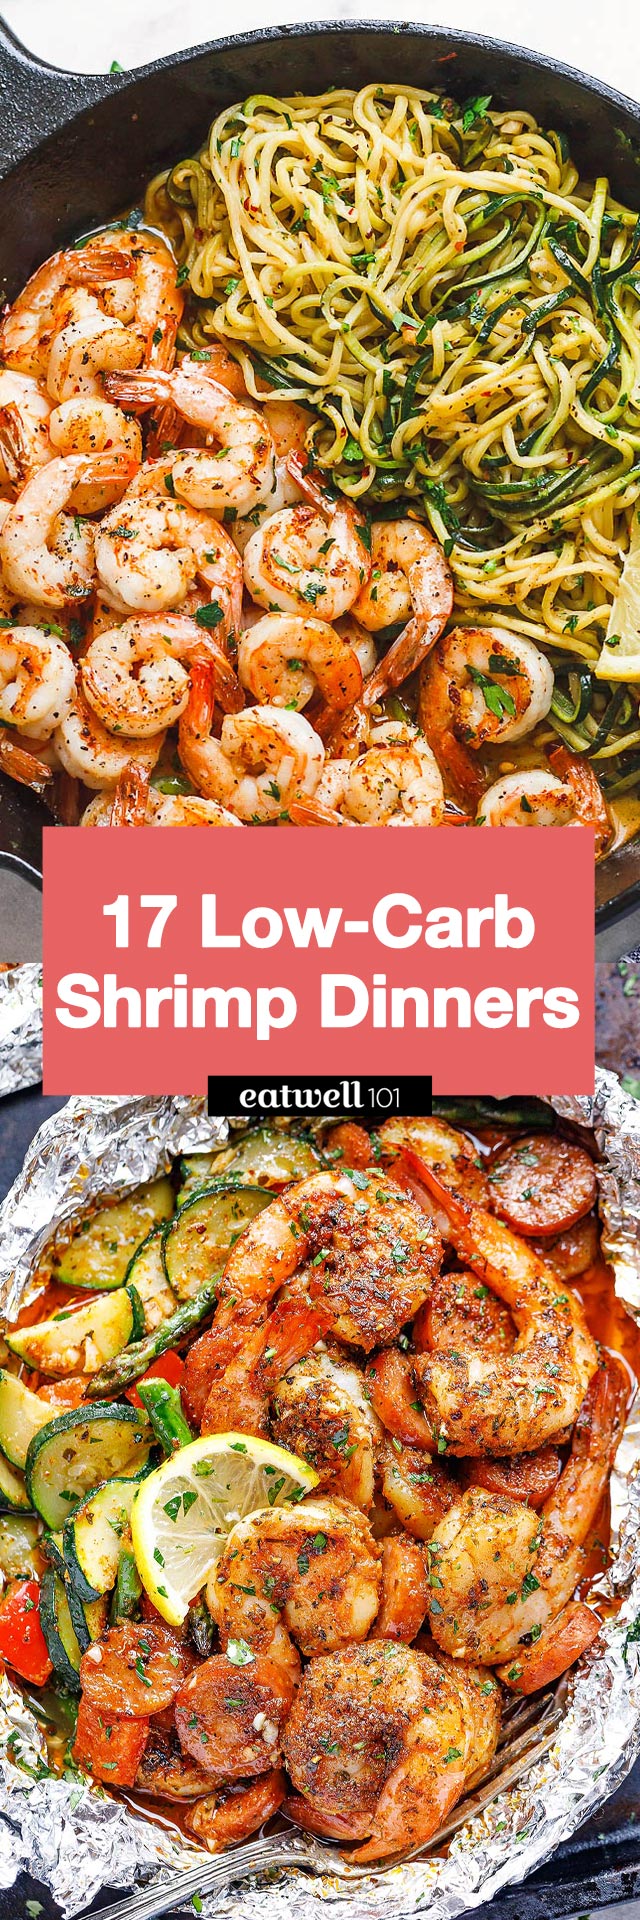 Low Carb Shrimp Recipes - #shrimp #low-carb #recipes #eatwell101 - These quick and easy low-carb shrimp recipes are exactly what you need for dinner. 